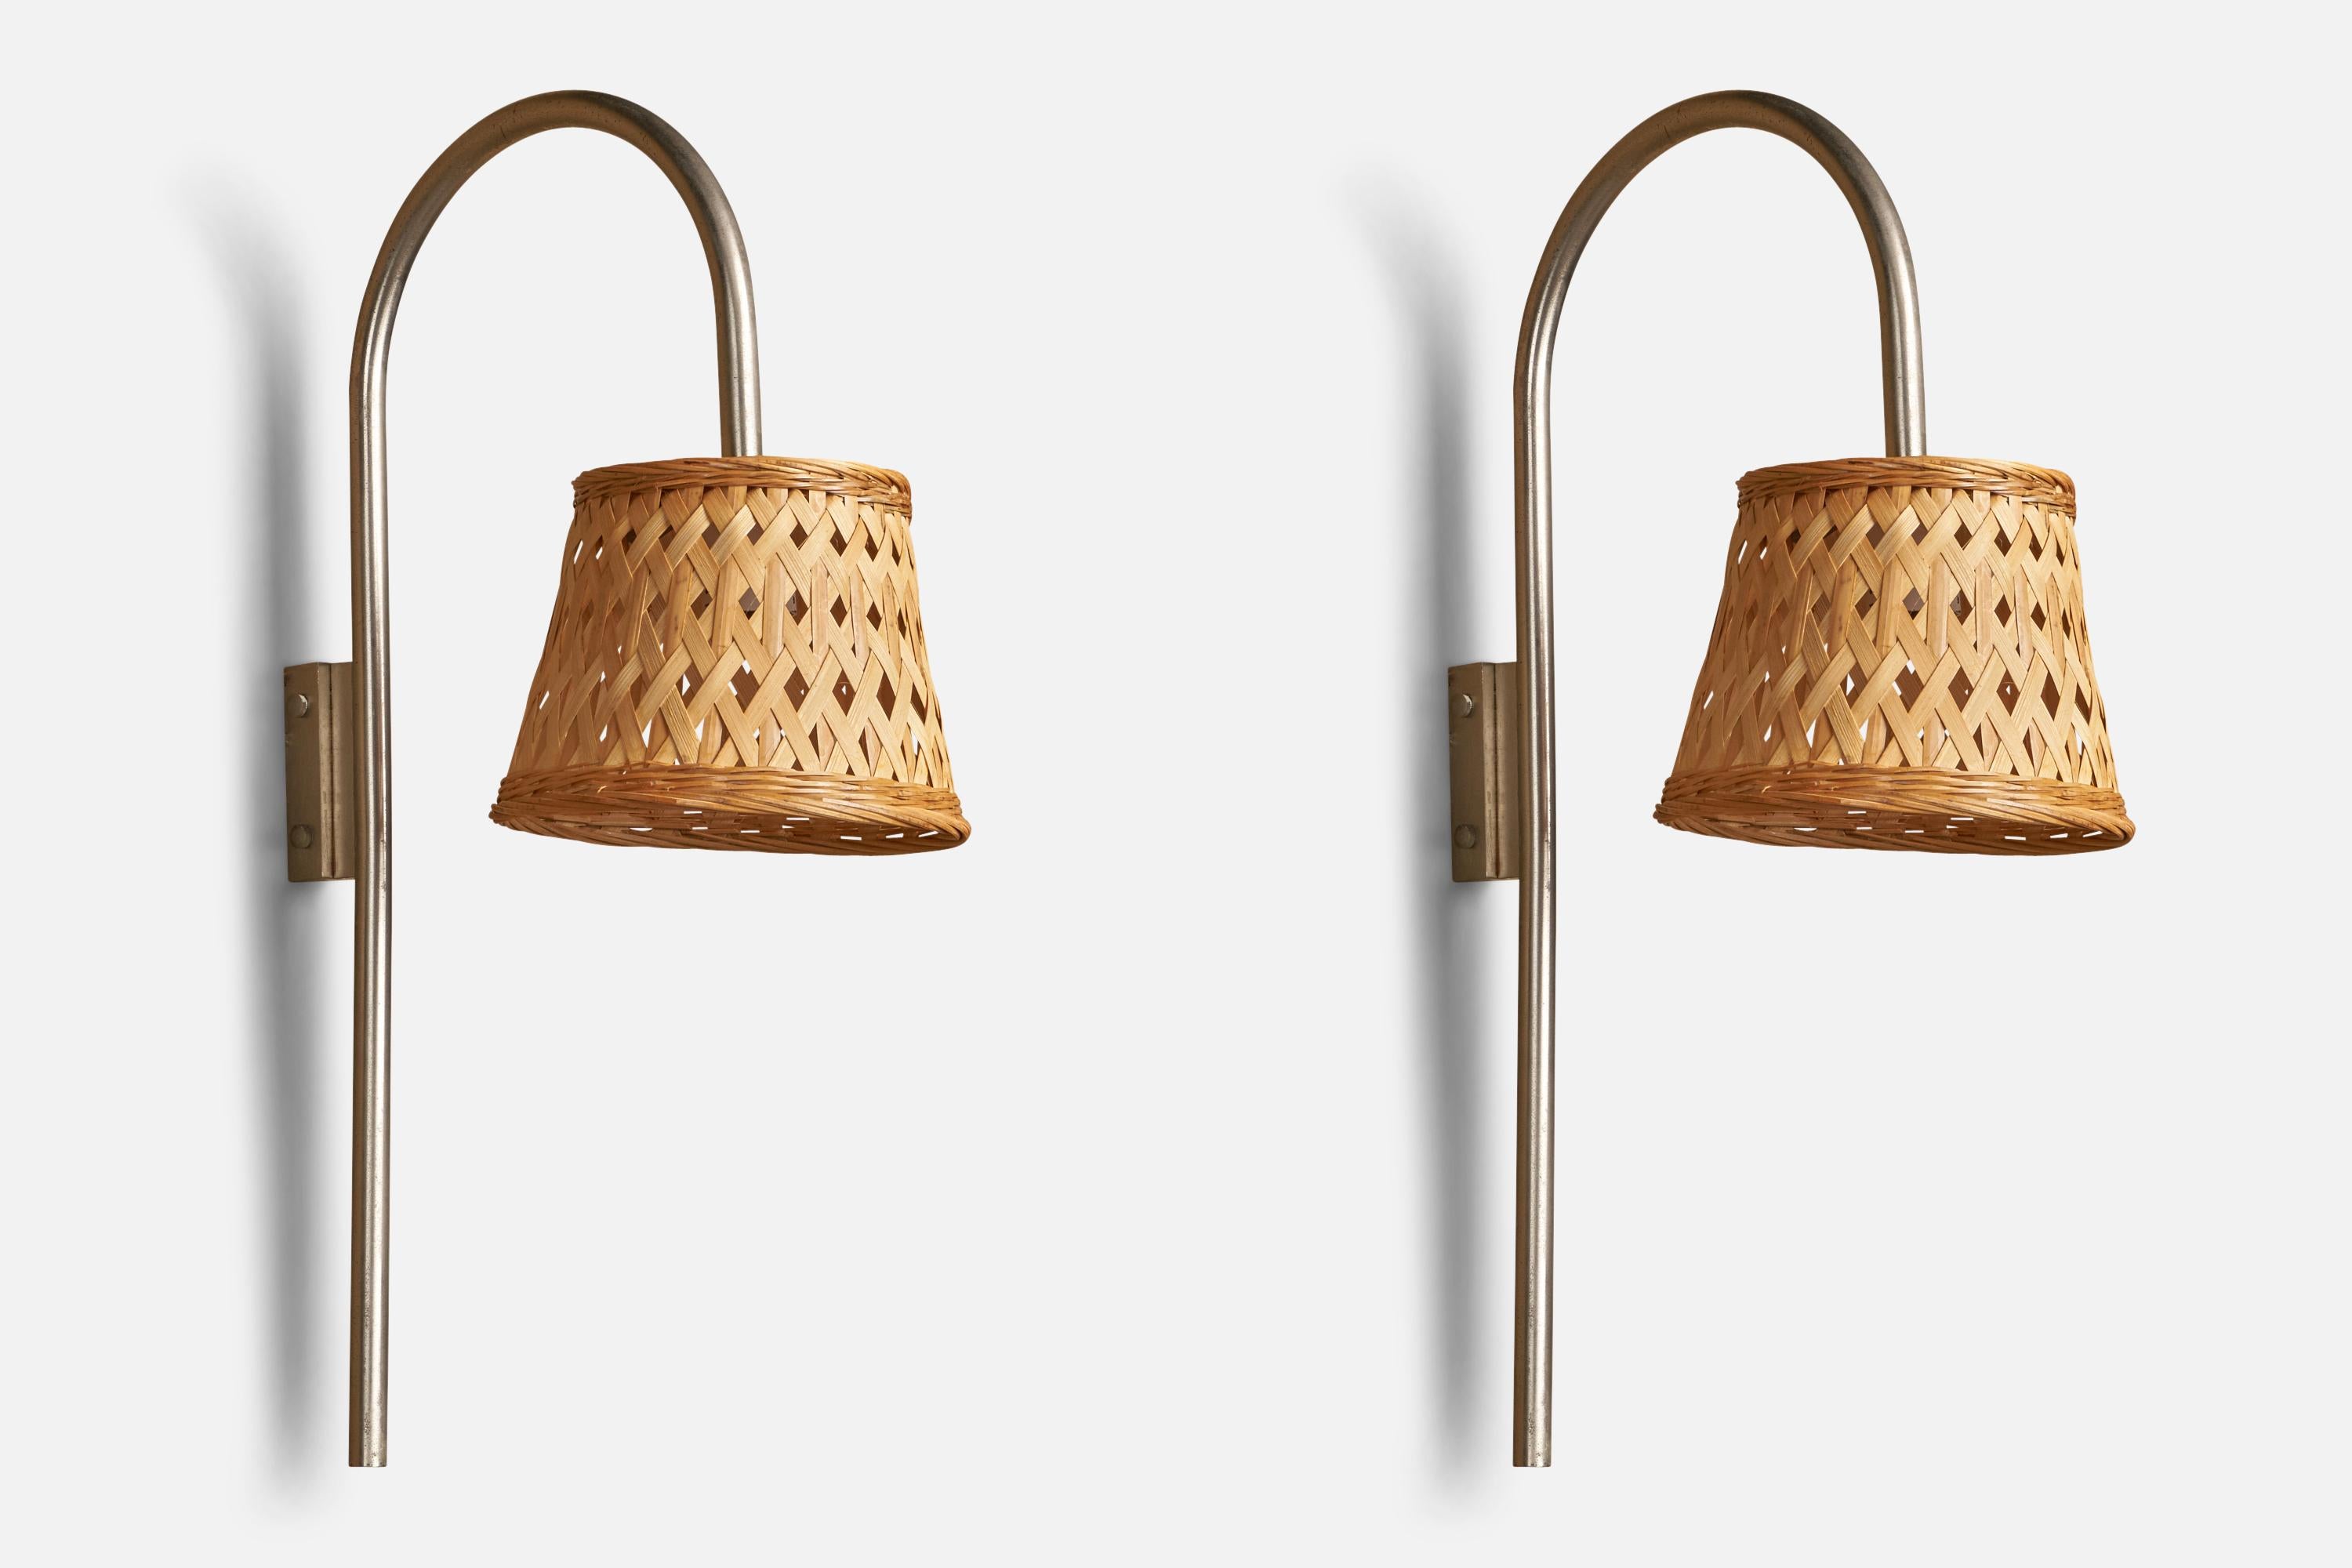 A pair of nickel and rattan wall lights, designed and produced in Italy, 1960s.

Overall Dimensions (inches): 24